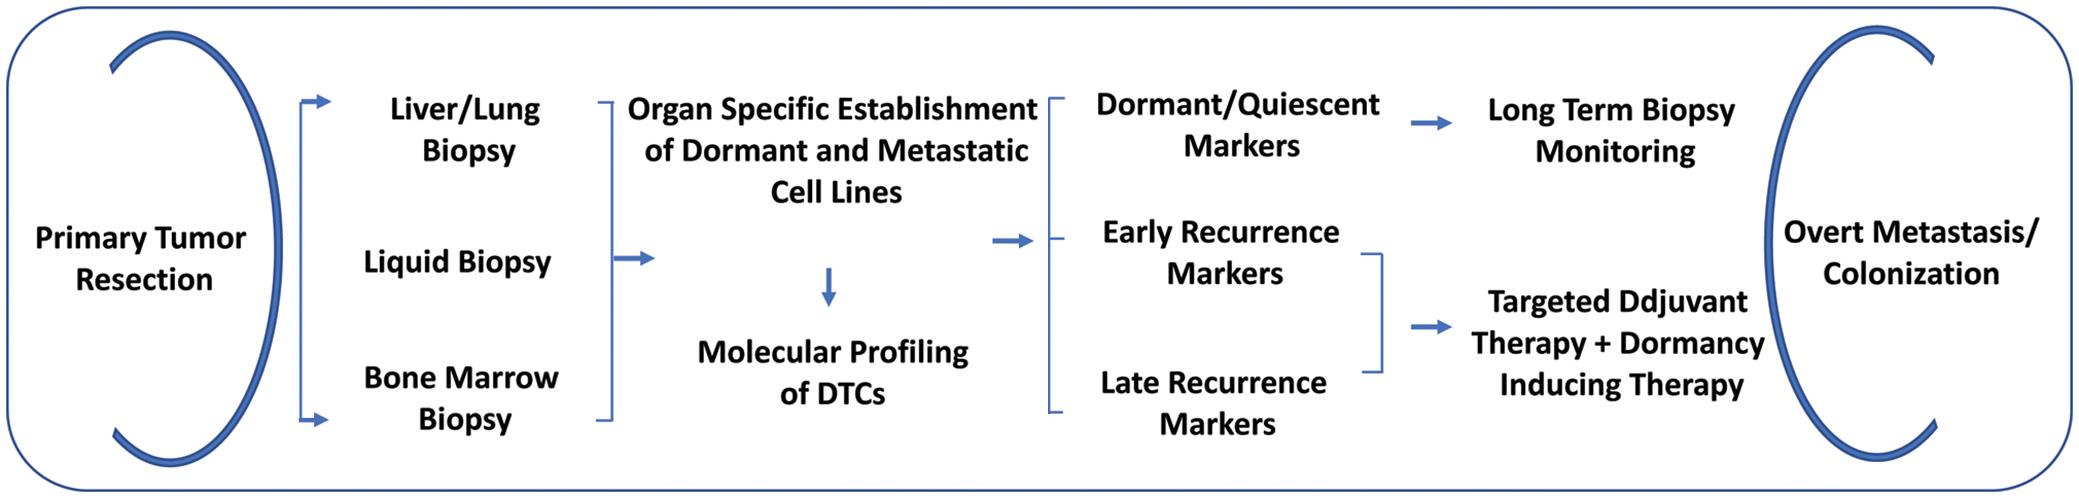 Schematic showing how understanding the molecular features of disseminated tumor cells from various biopsies can aid in future control and treatment of disseminated residual disease before their development into overt metastasis.